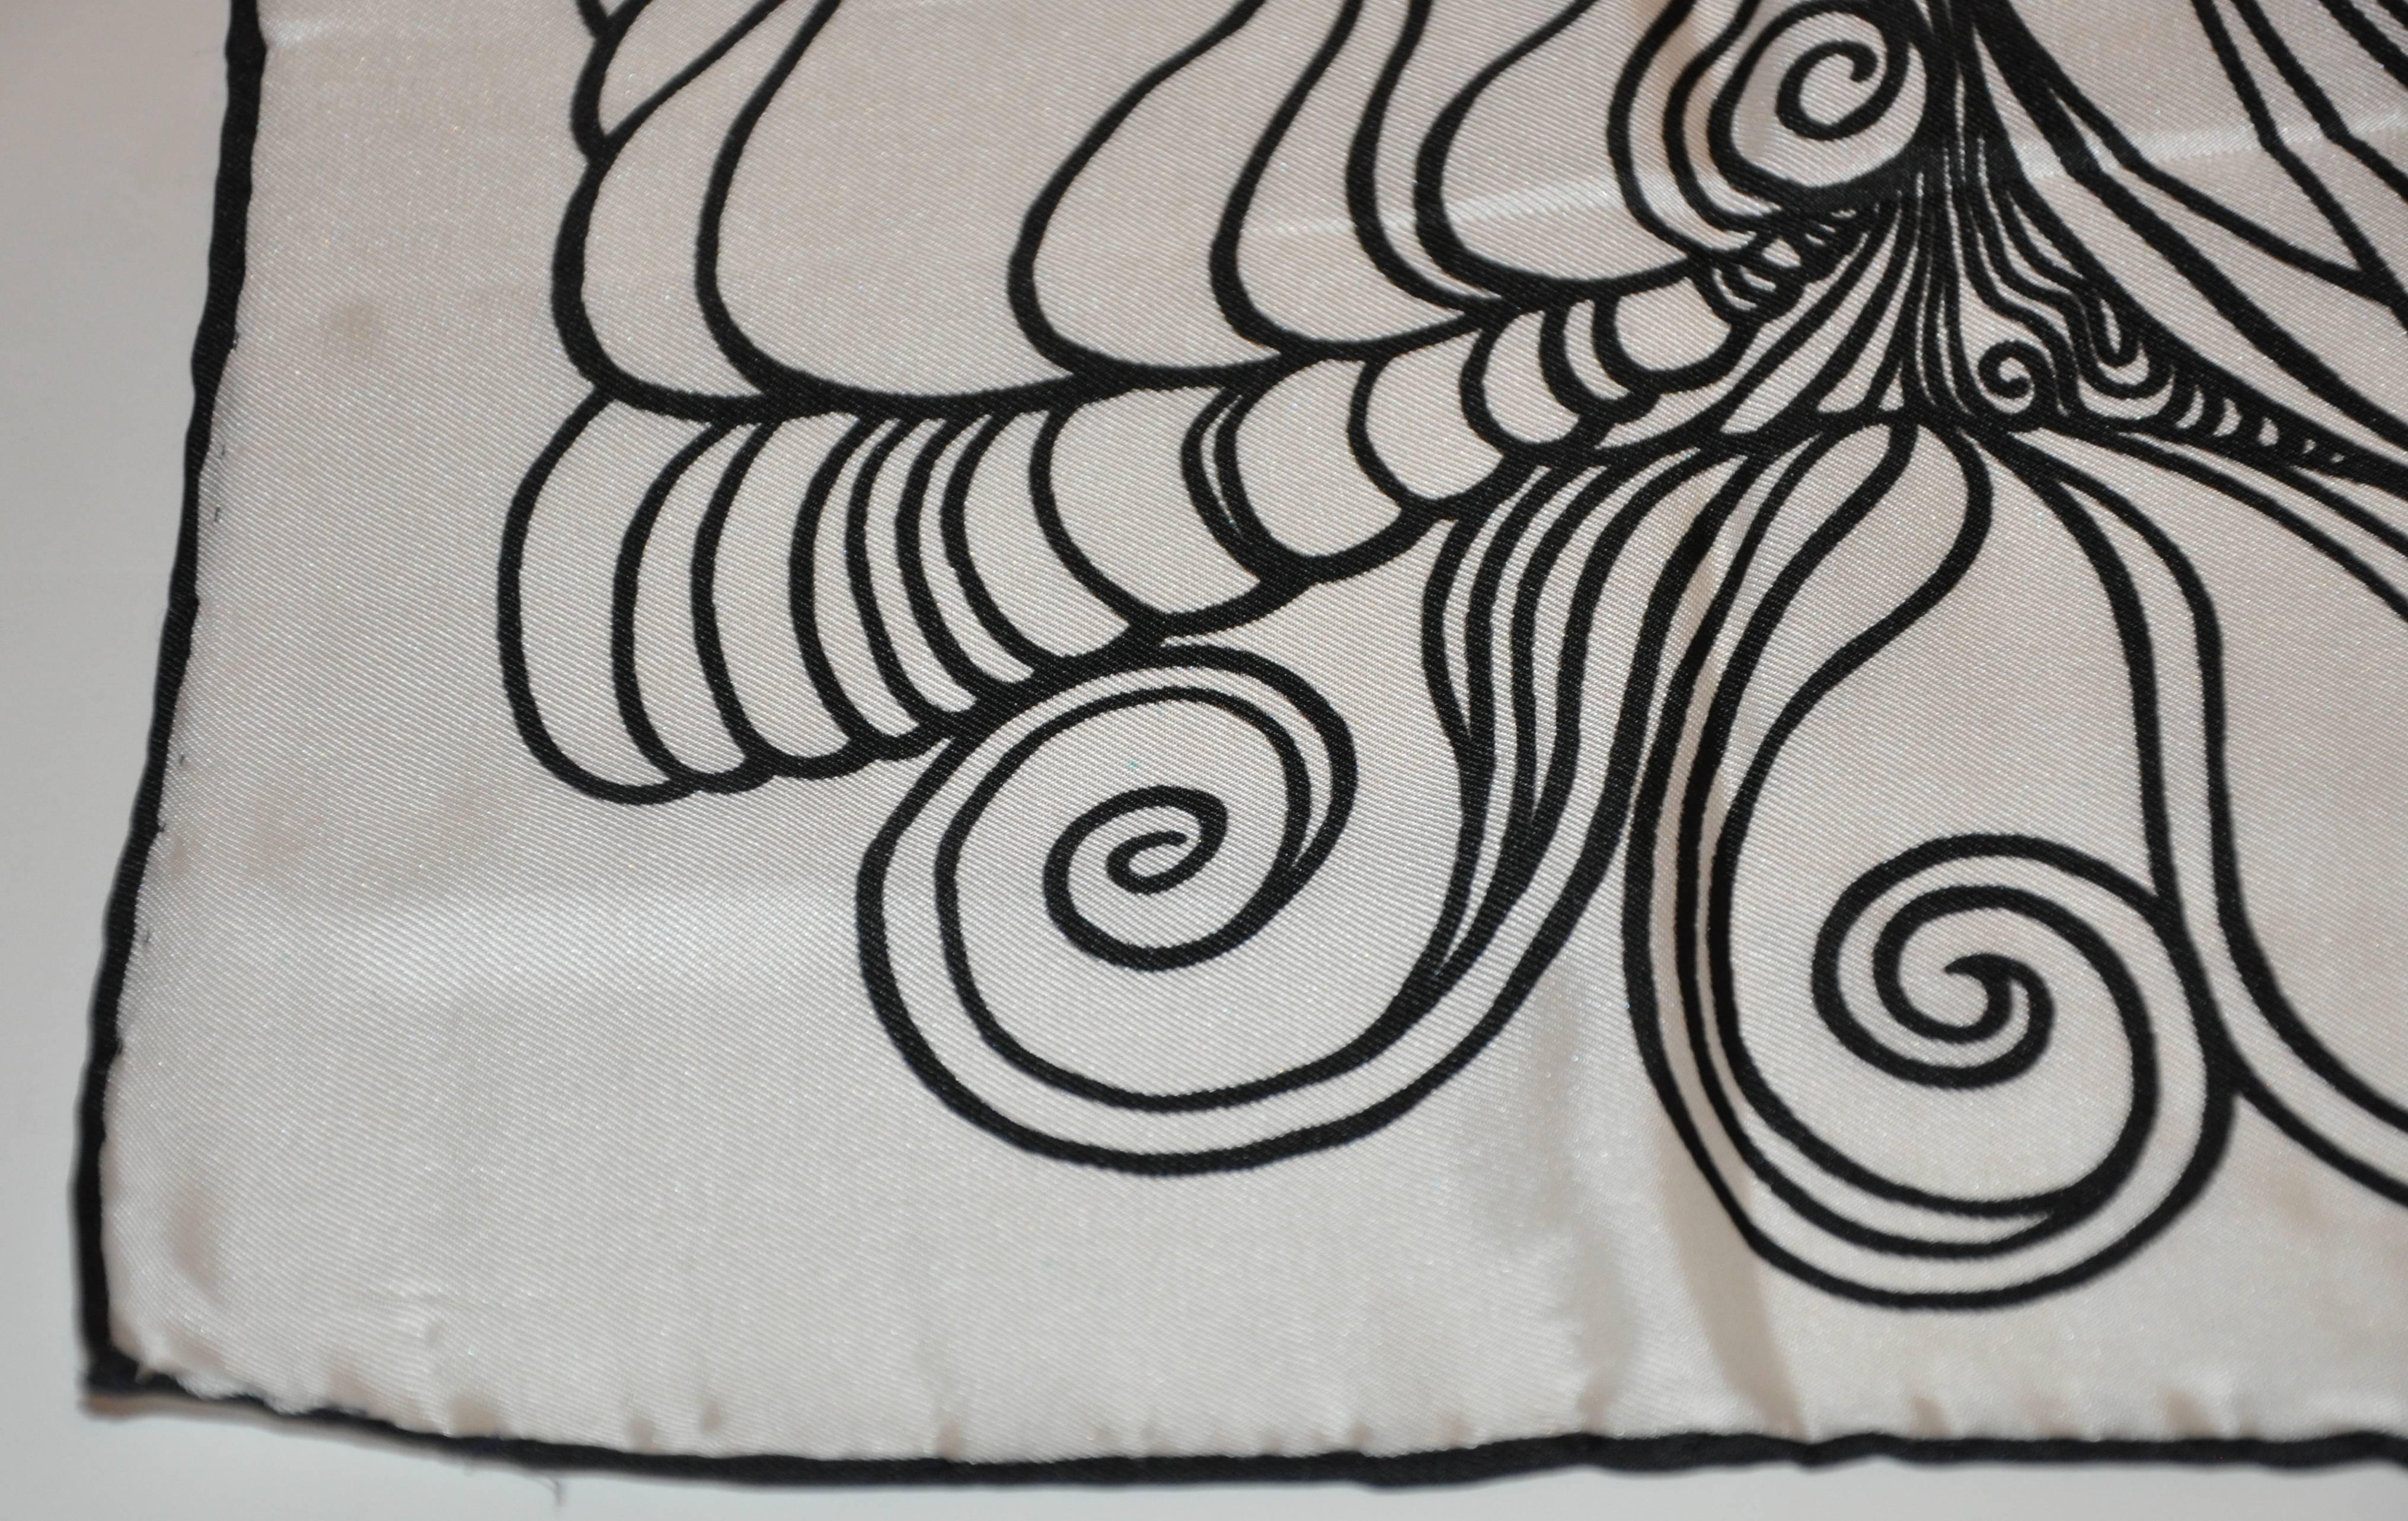        This rare Georgio Sant' Angelo wonderful detailed black & white silk scarf is finished with hand-rolled edges and measures 23